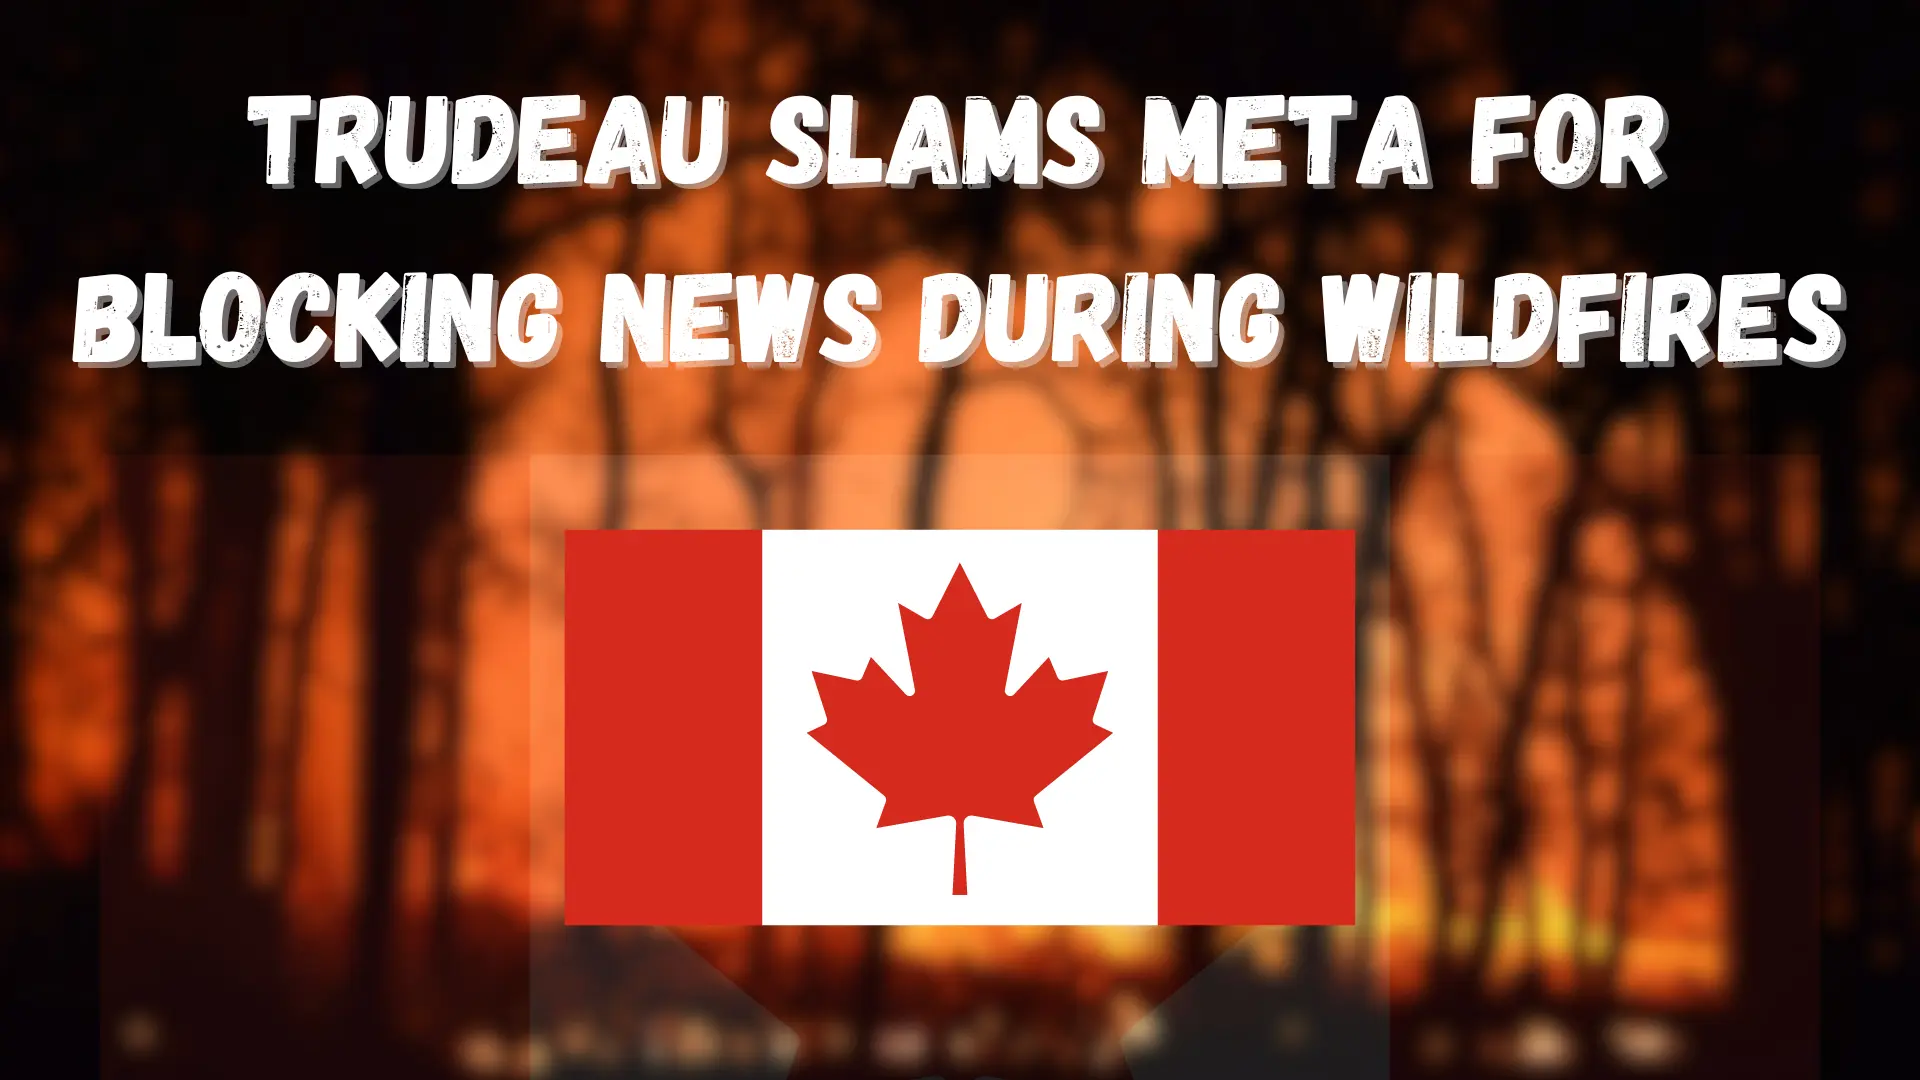 Trudeau Slams Meta for Blocking News During Wildfires